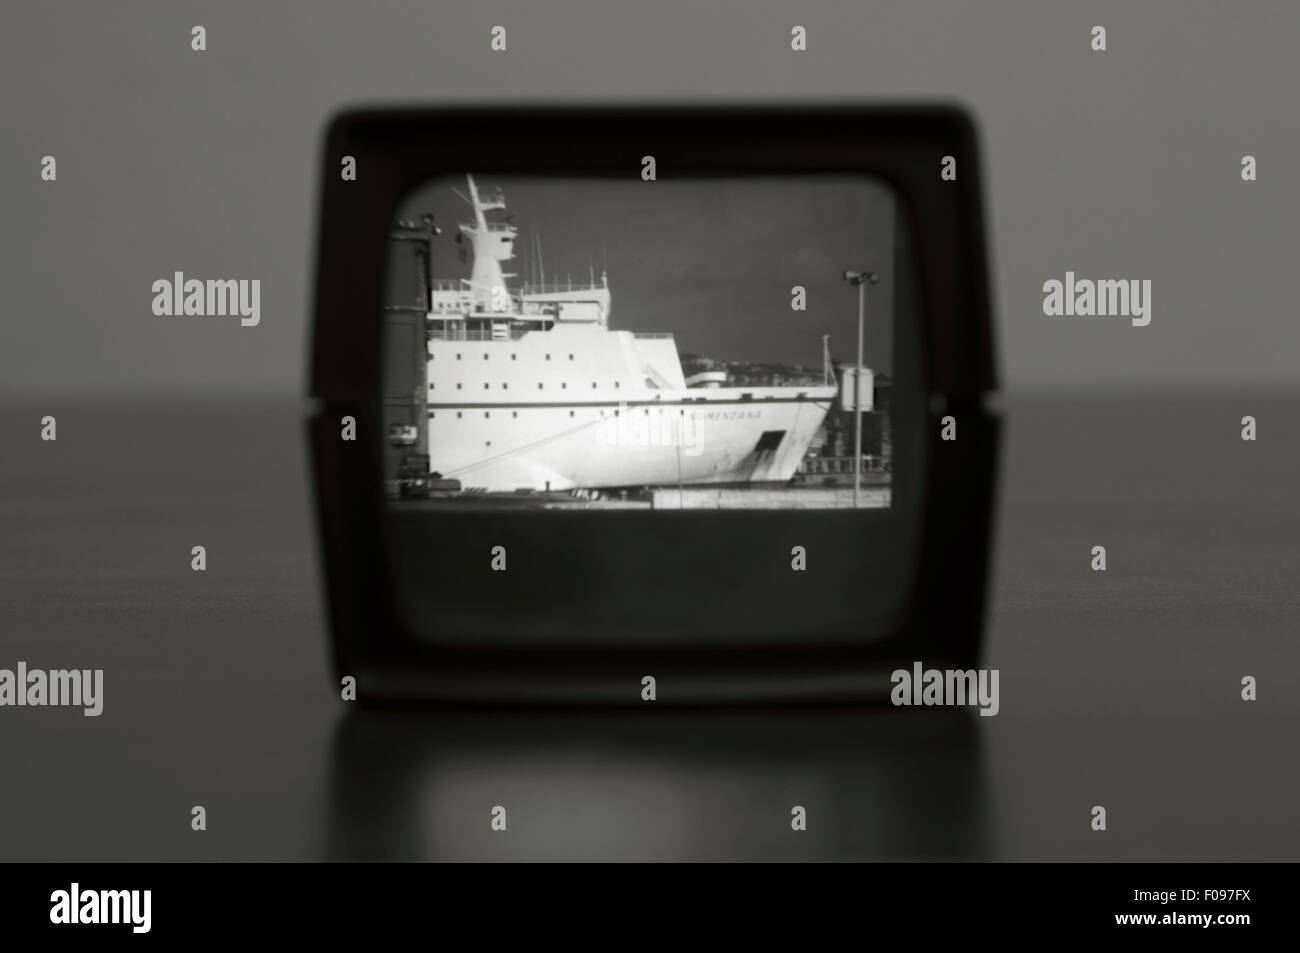 Ship on slide viewer Stock Photo